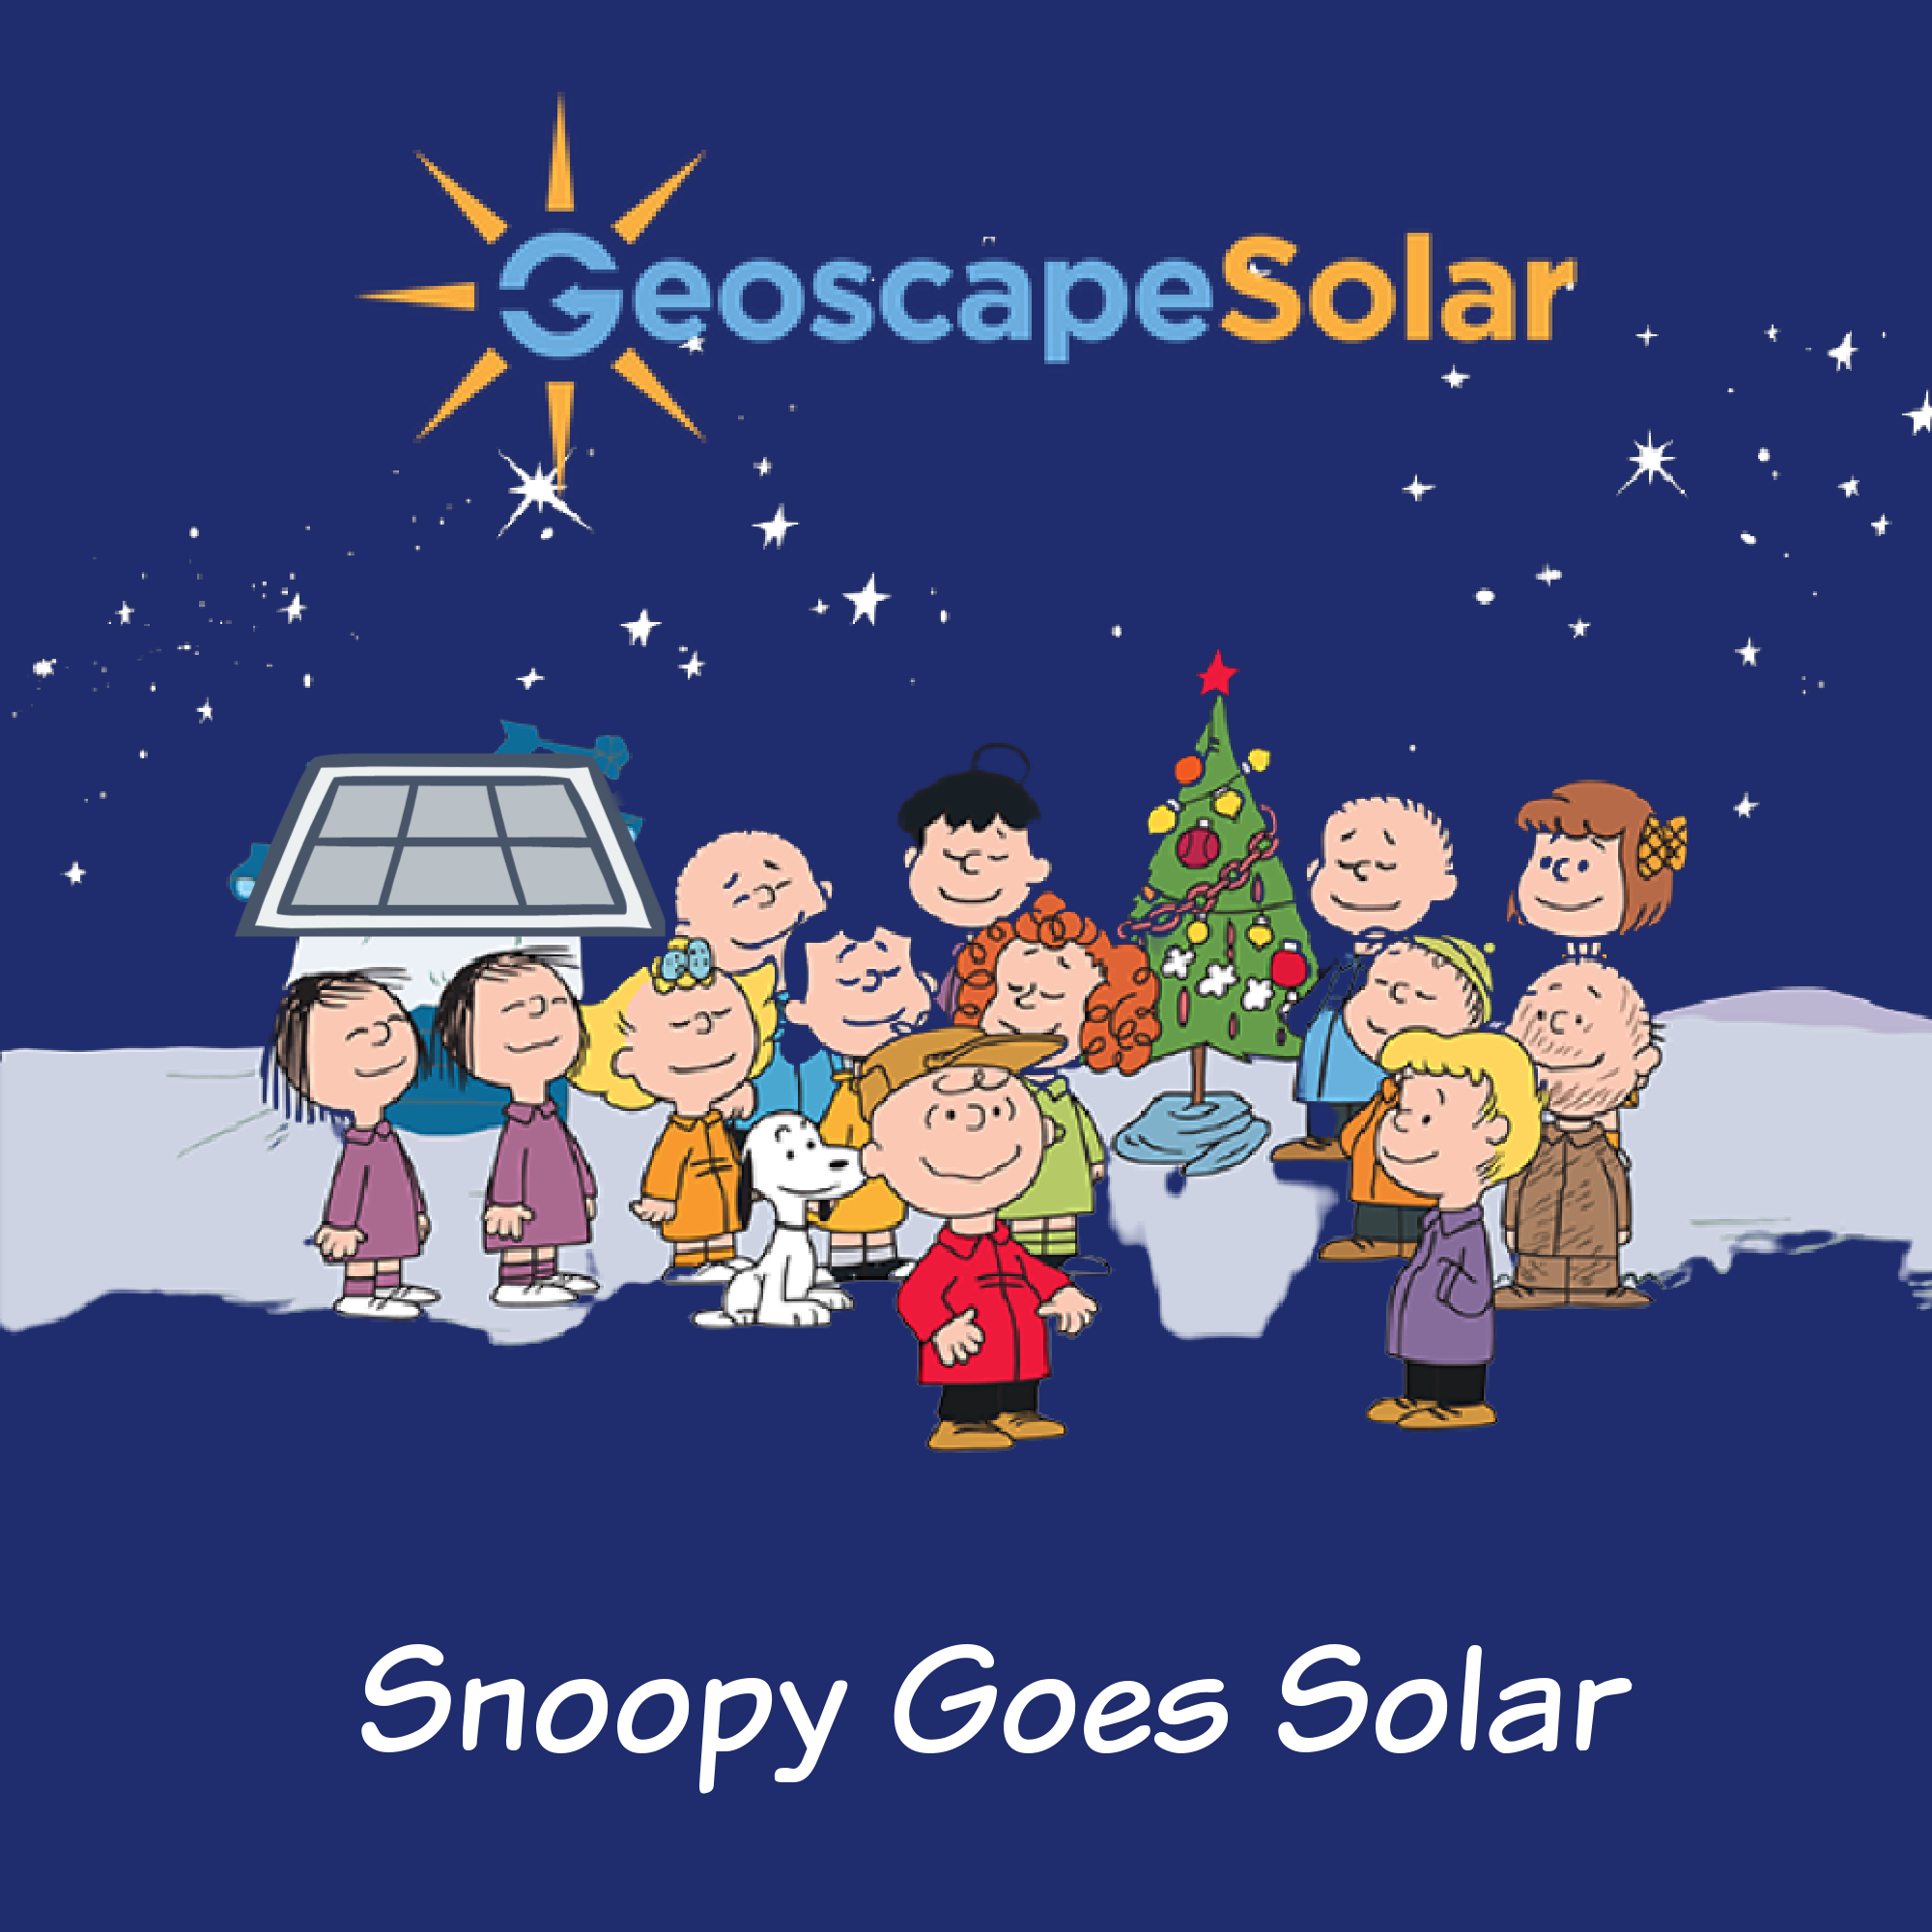 Geoscape Solar makes going solar easy and affordable in New Jersey